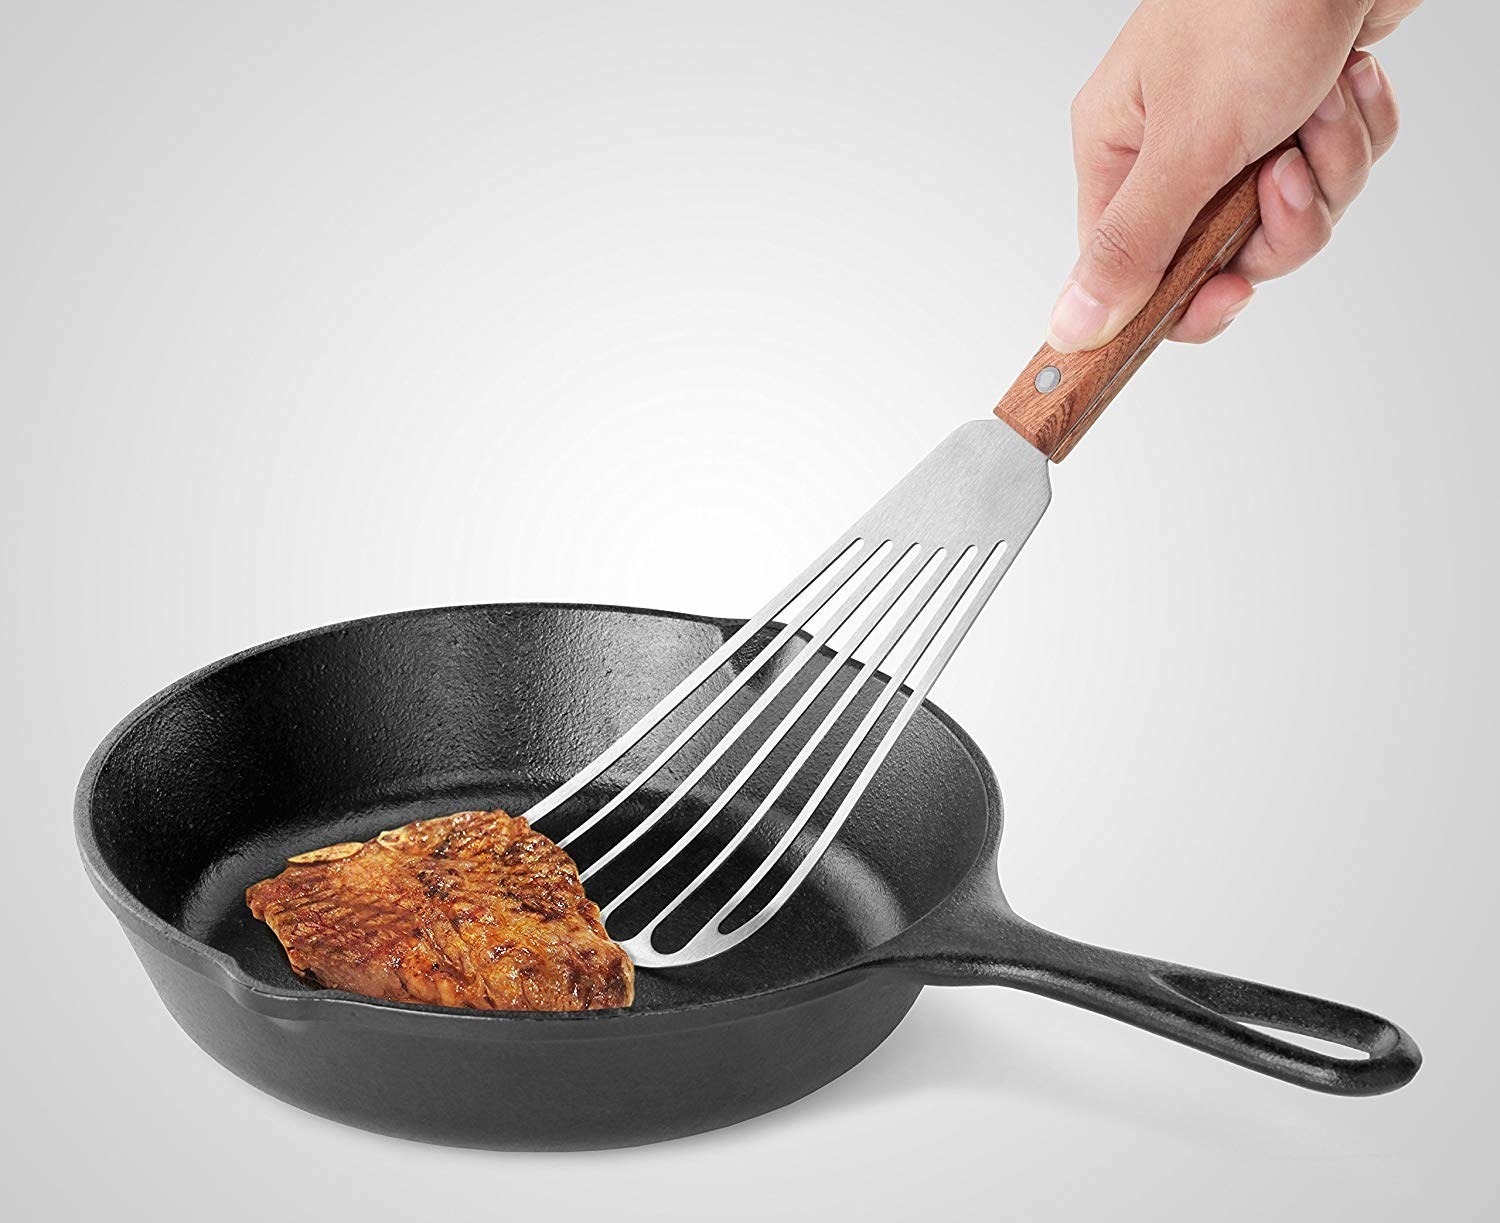 The spatula with a long head for flipping fish